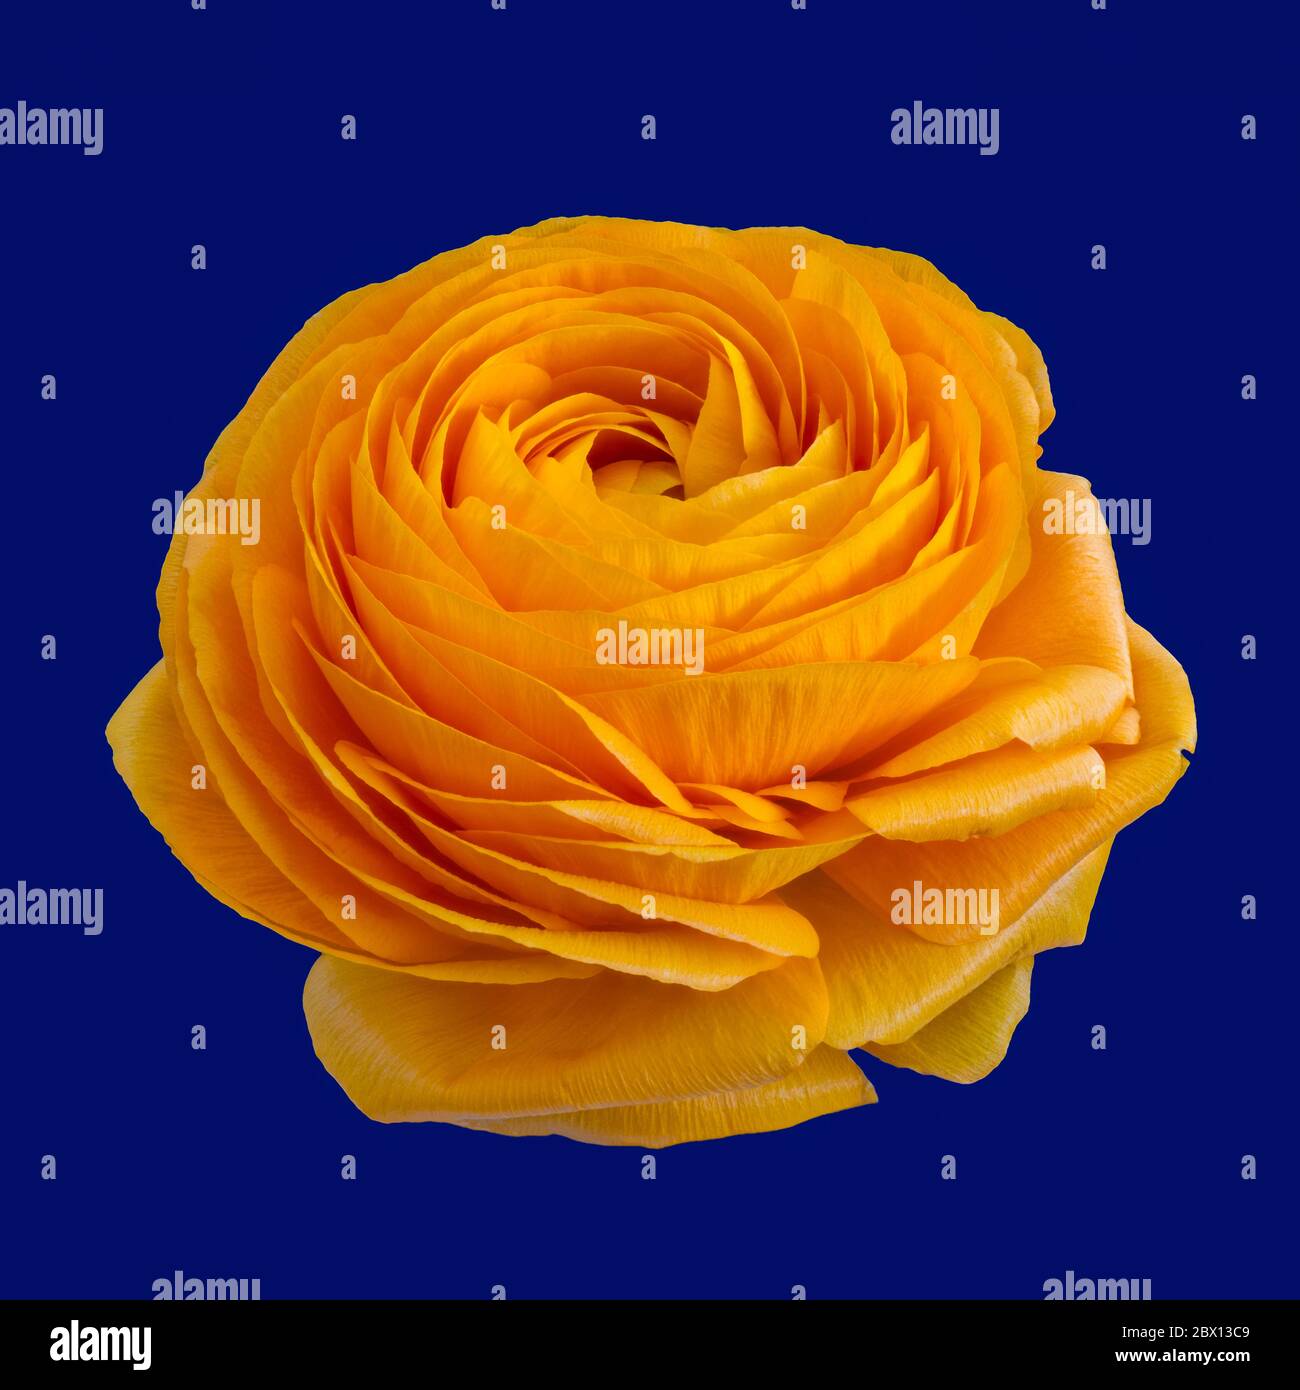 Isolated vibrant orange buttercup blossom on blue background Stock Photo